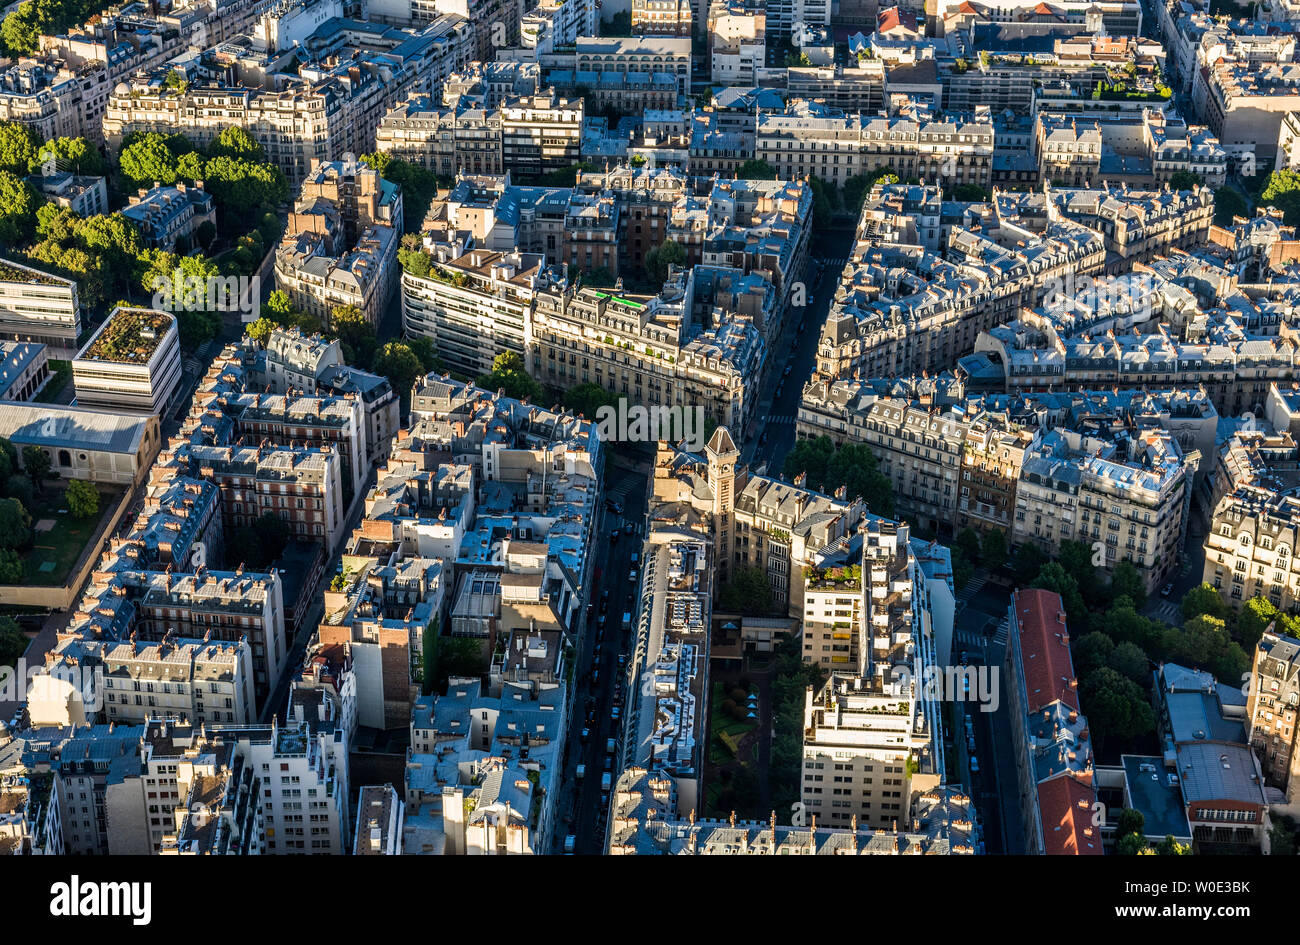 France, 7th arrondissement, view from the Eiffel Tower (avenue Rapp, rue de Montessuy) Stock Photo